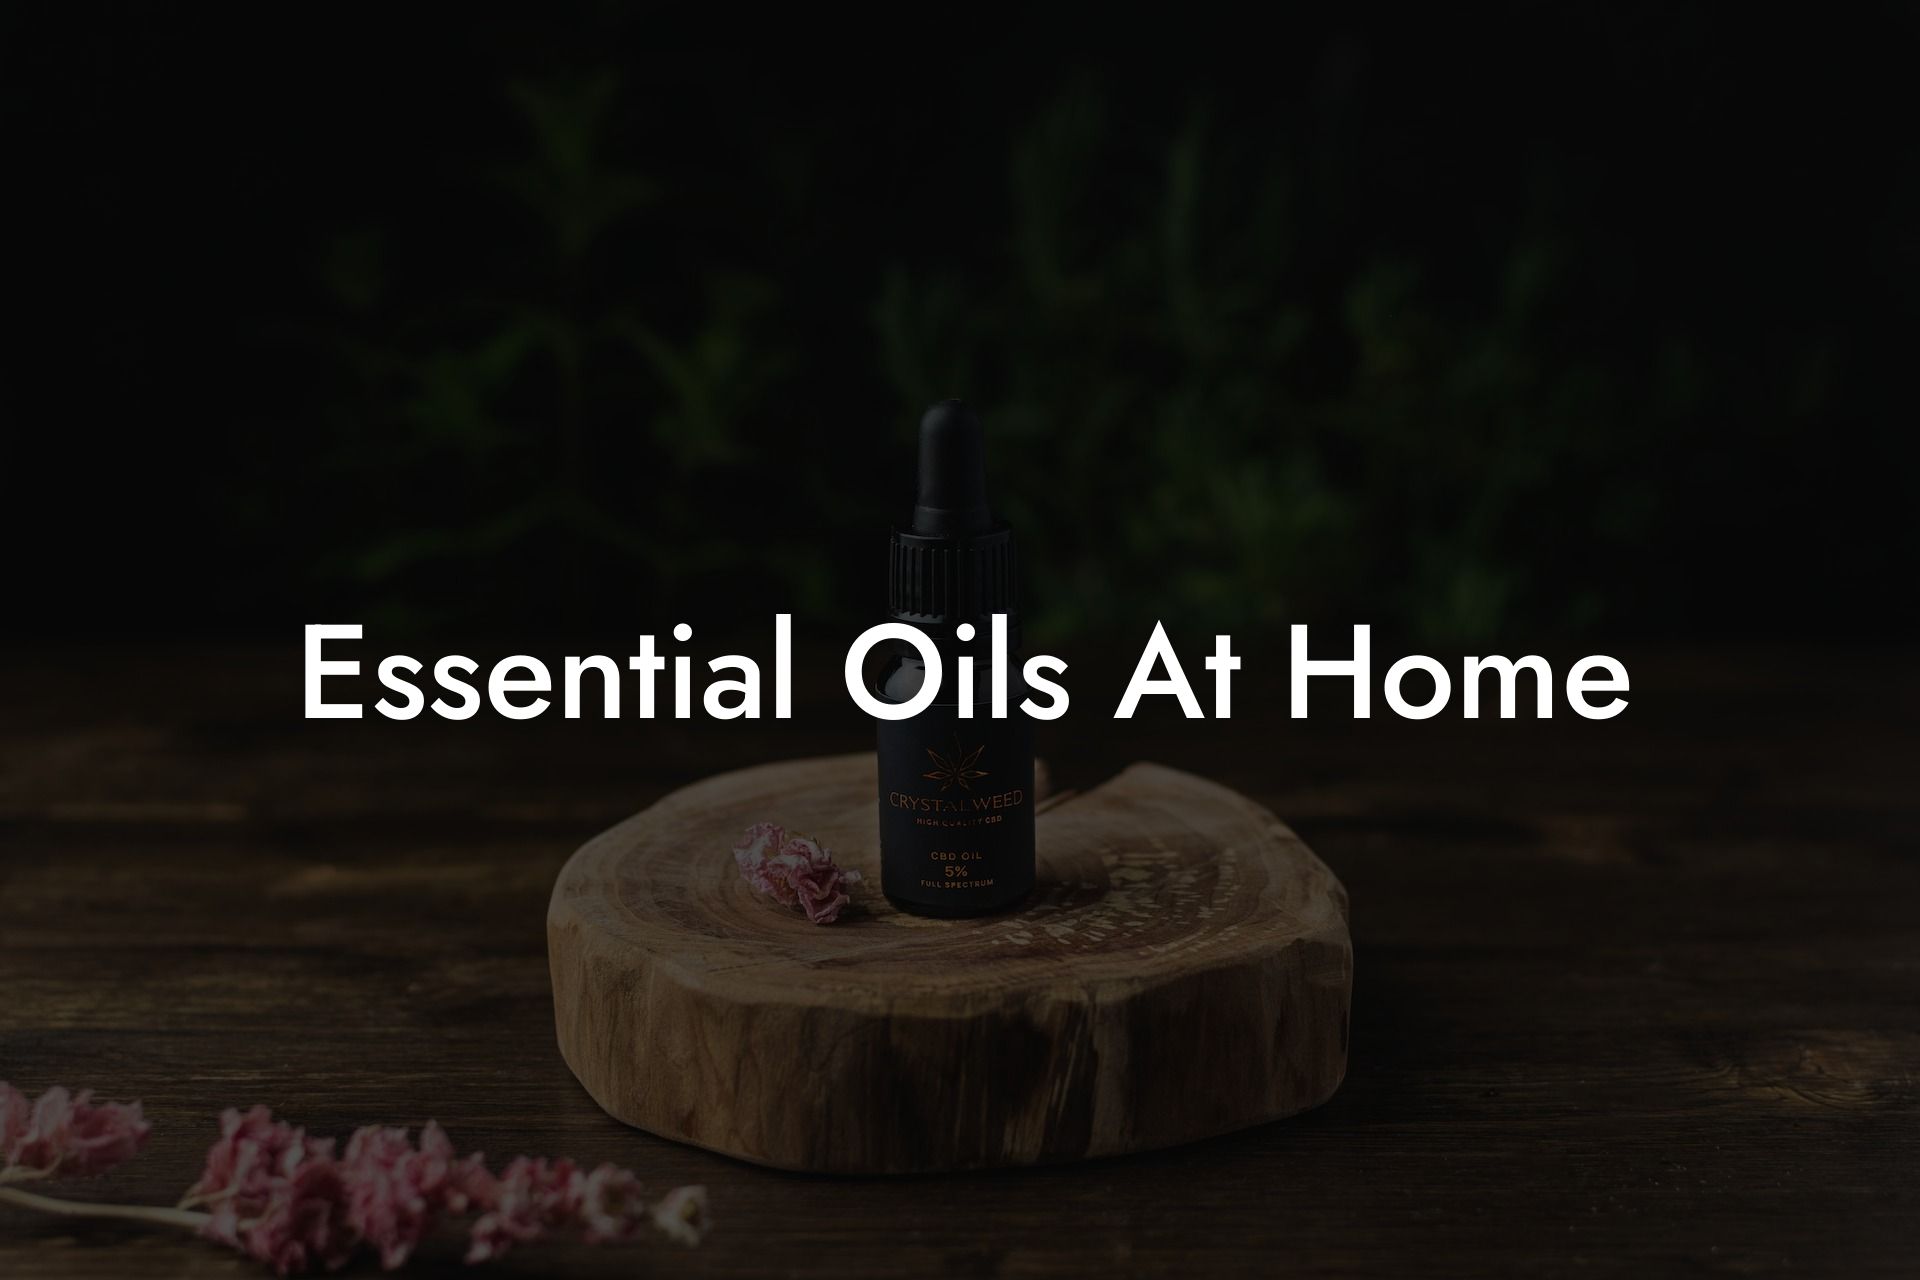 Essential Oils At Home